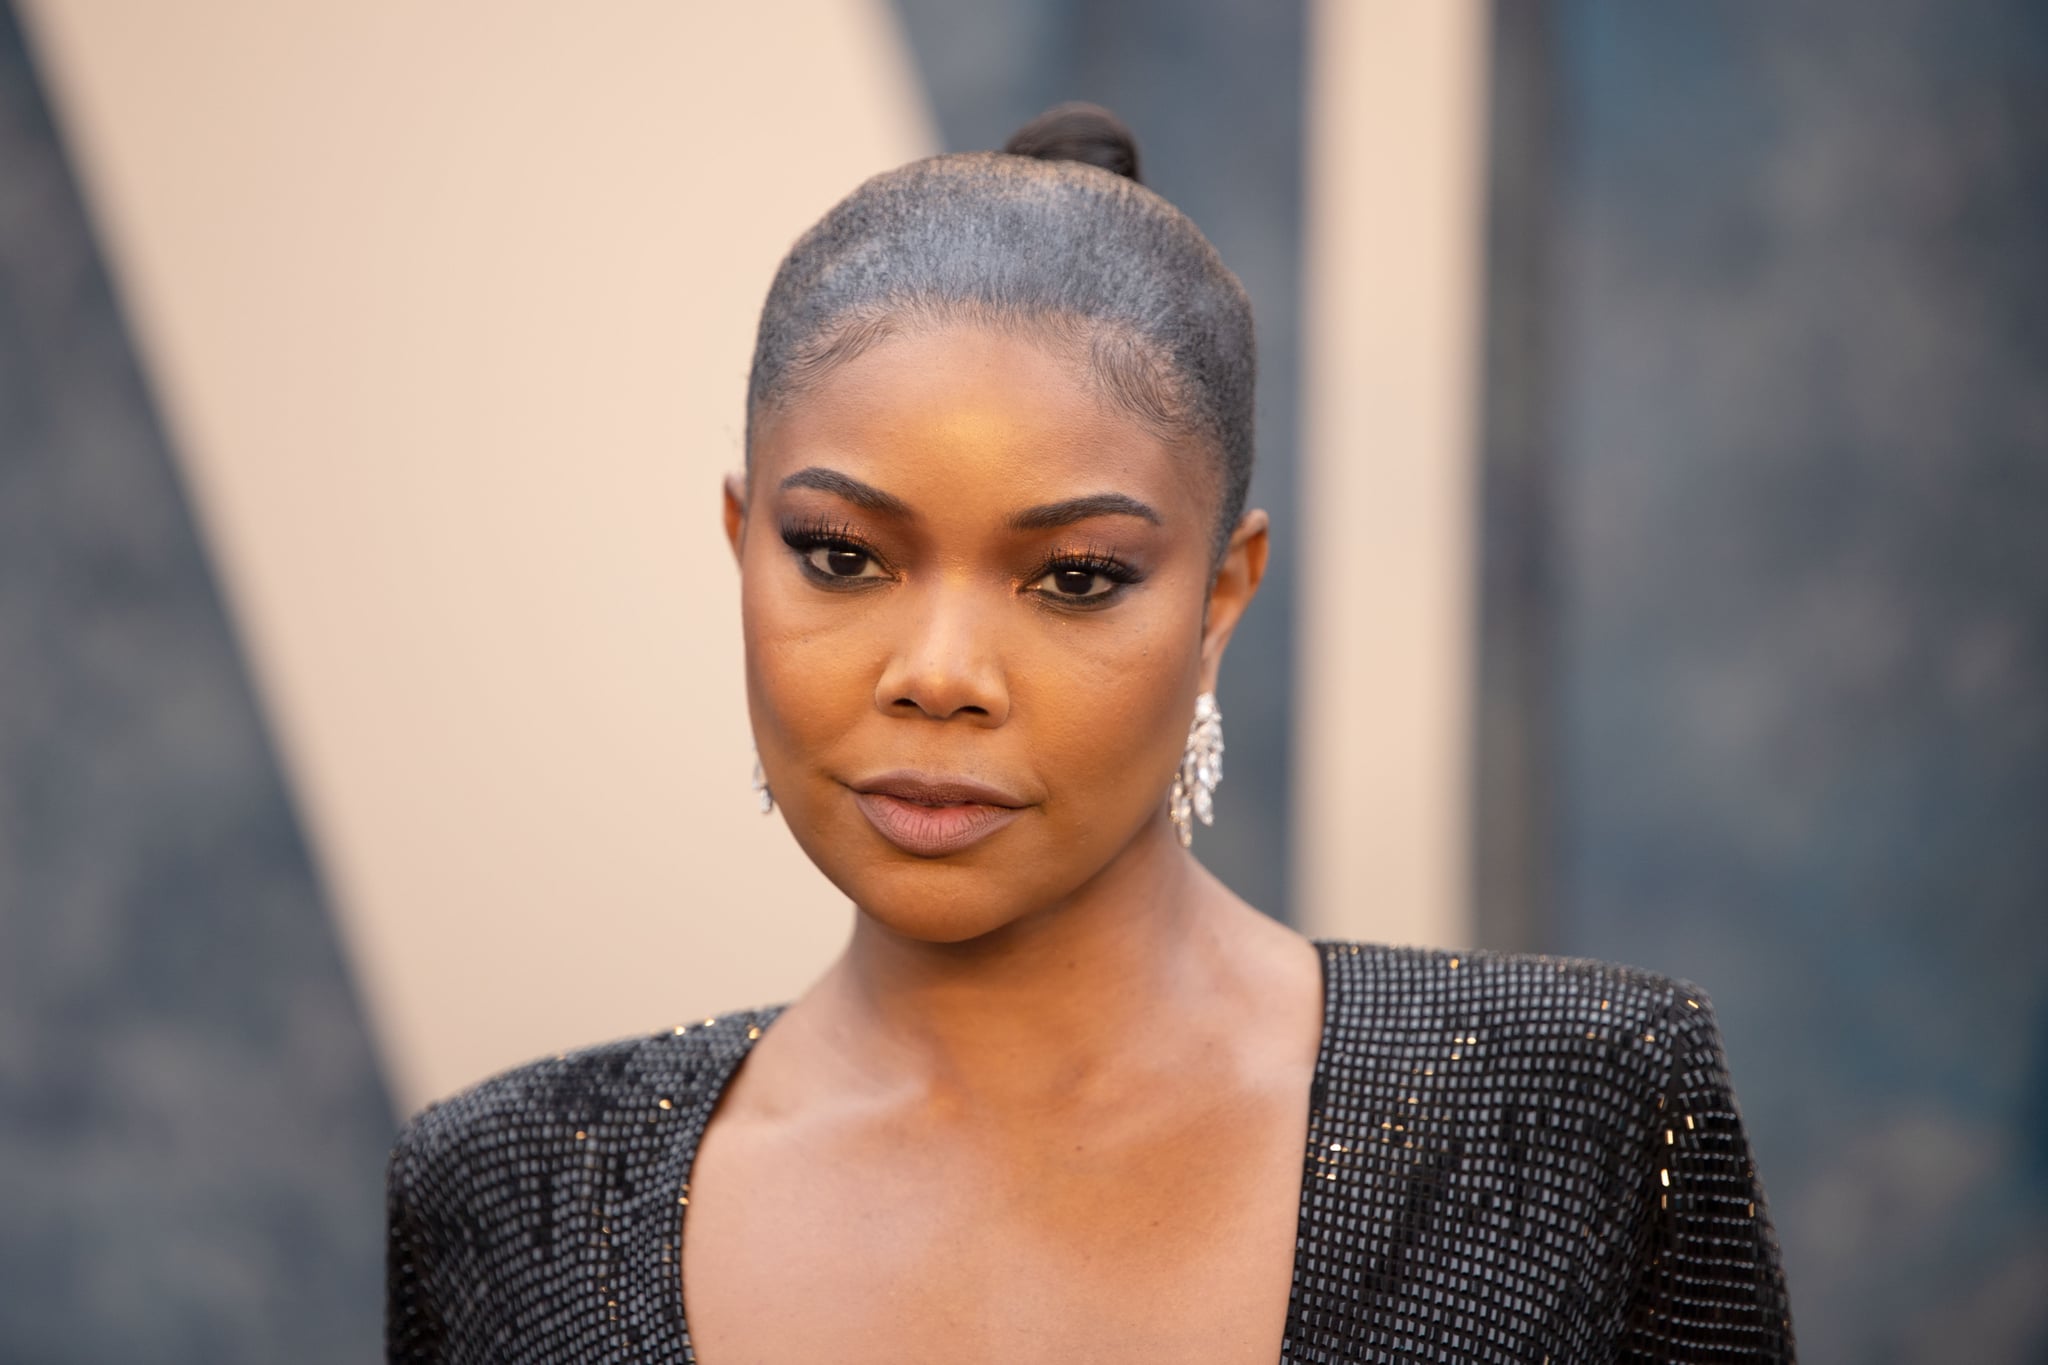 BEVERLY HILLS, CALIFORNIA - MARCH 12: Gabrielle Union attends the 2023 Vanity Fair Oscar Party Dinner Arrivals at Wallis Annenberg Center for the Performing Arts on March 12, 2023 in Beverly Hills, California. (Photo by Robert Smith/Patrick McMullan via Getty Images)